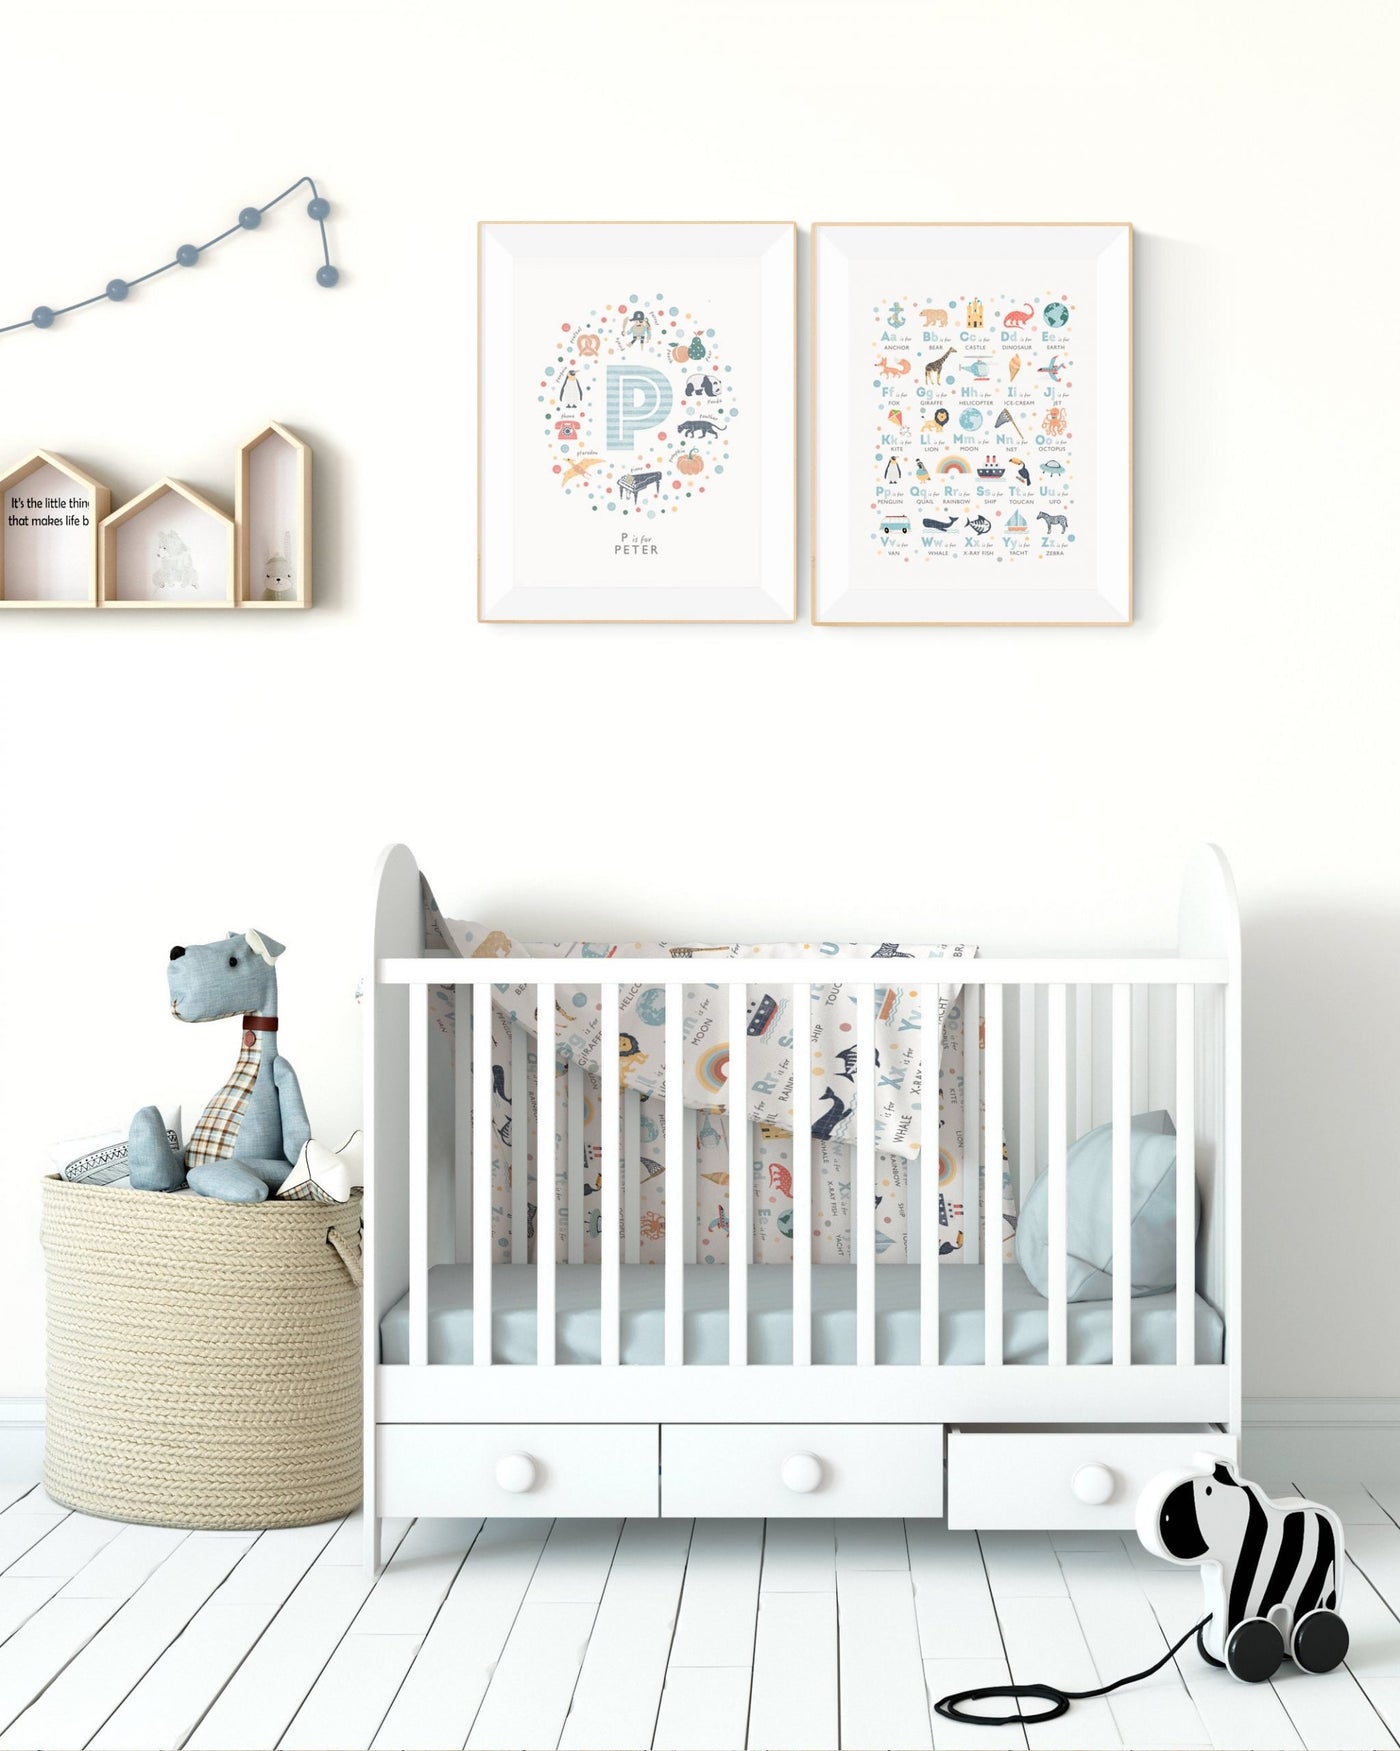 Interior nursery scene with the Boys Alphabet Nursery Print and a personalised initial letter print framed and hung on a wall over a crib, soft toys and shelves are also in the picture